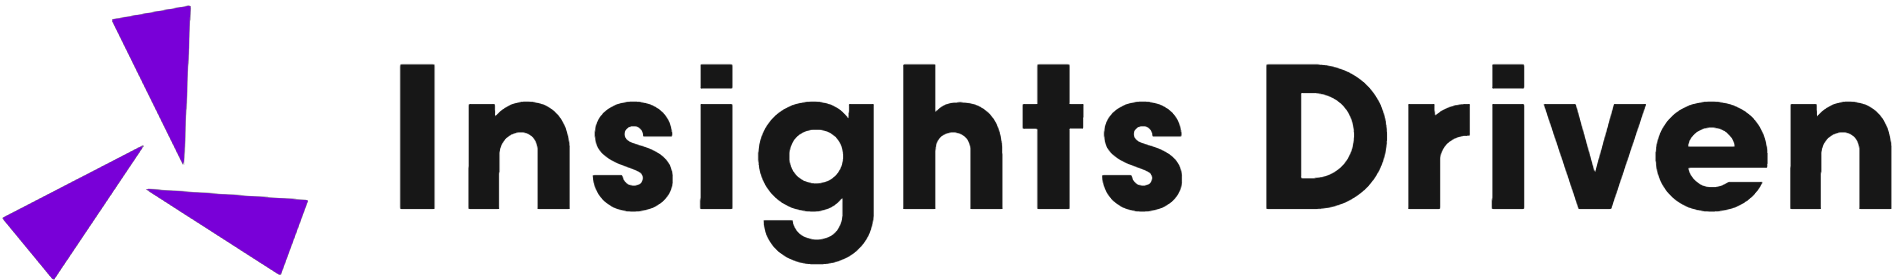 Insights-Driven Organizations and Insights-Driven Consulting